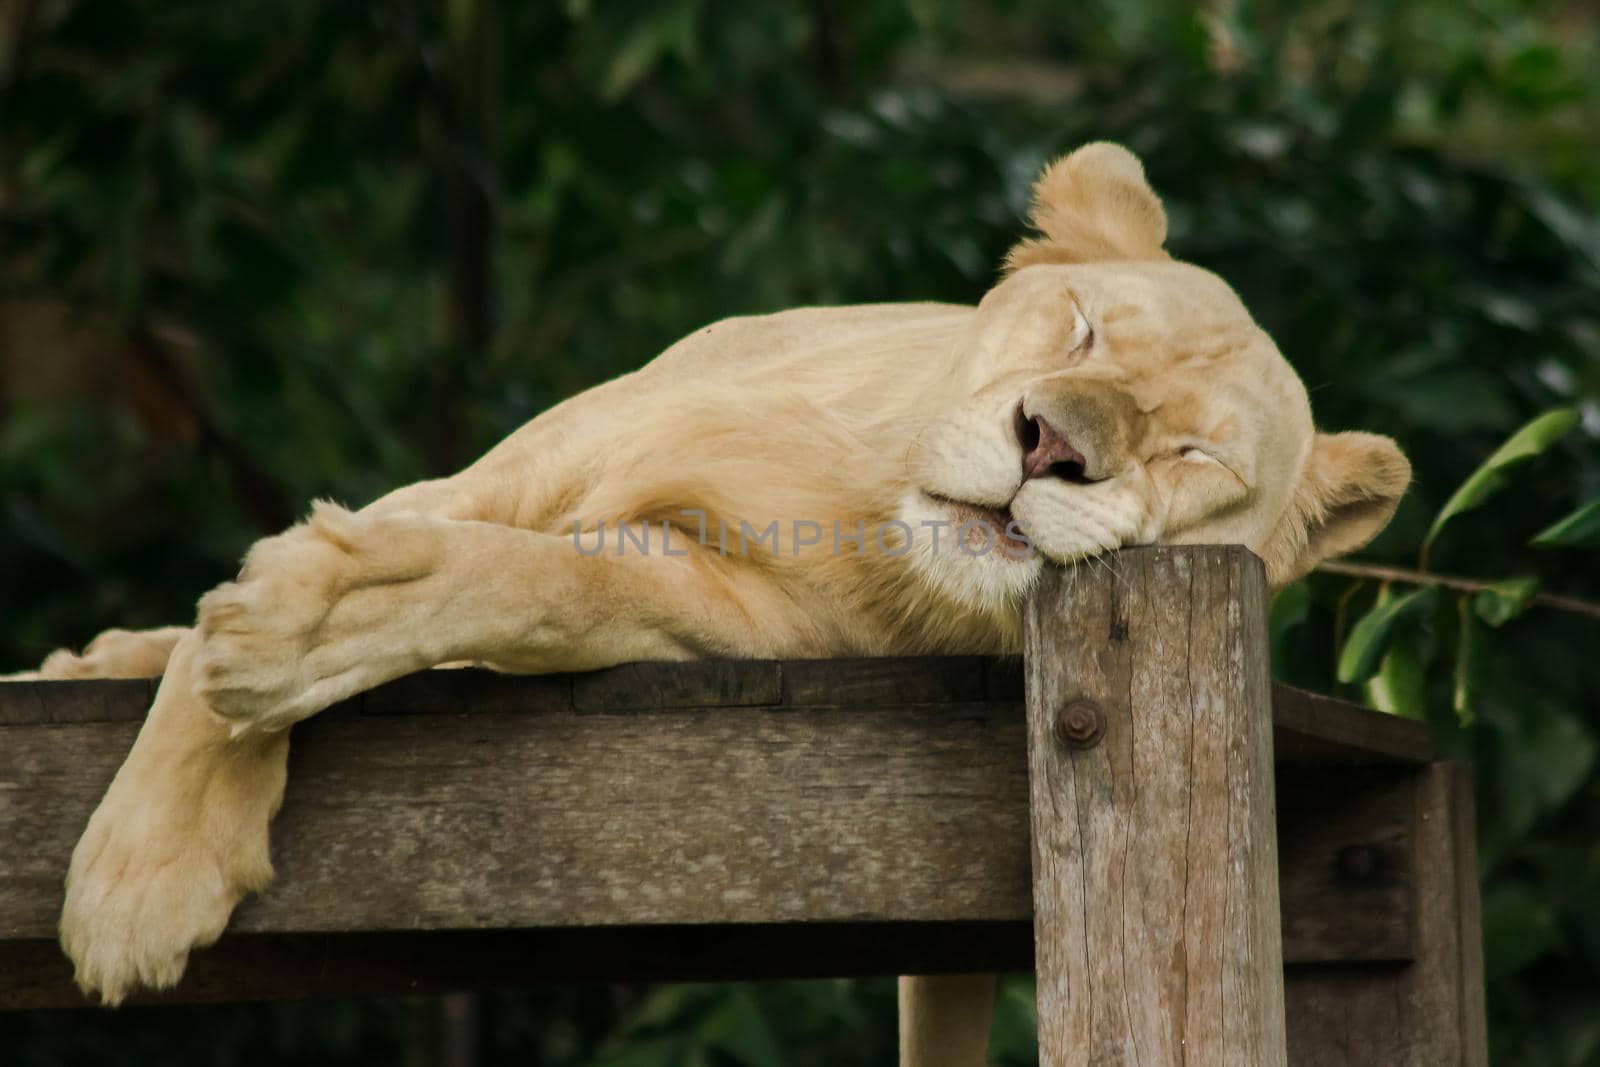 Female African Lion sleeps in peace.
The African Lion is found in Africa. In Asia, it can still be found, for example, in western India.